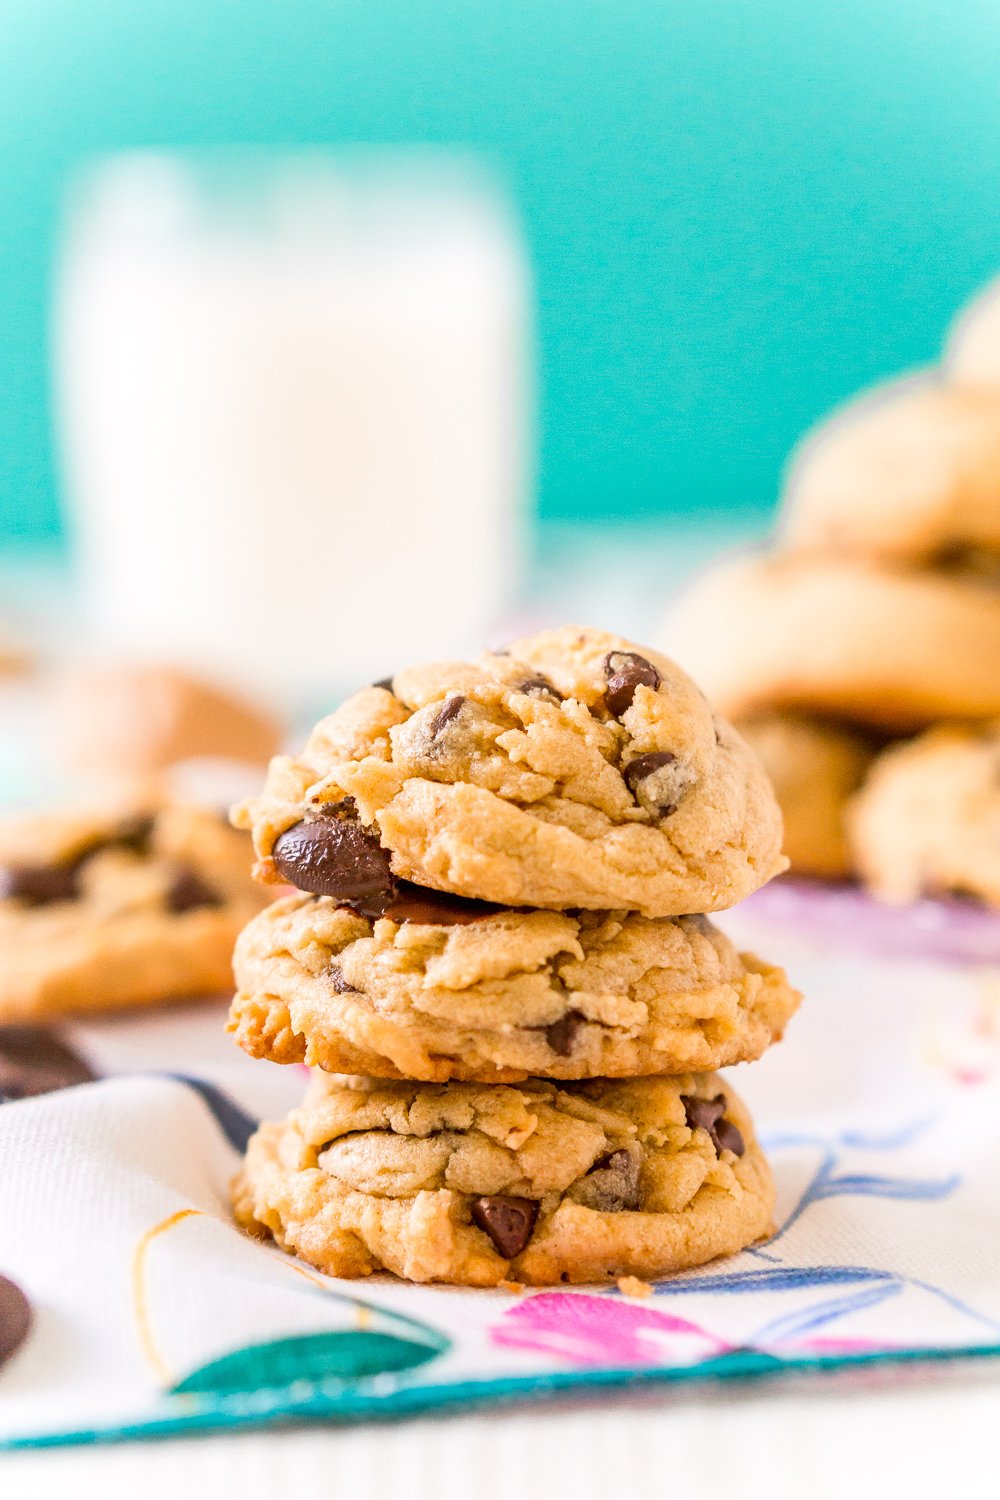 Three Peanut Butter Chocolate Chip Cookies stacked on top of each other with milk and more cookies in the background.